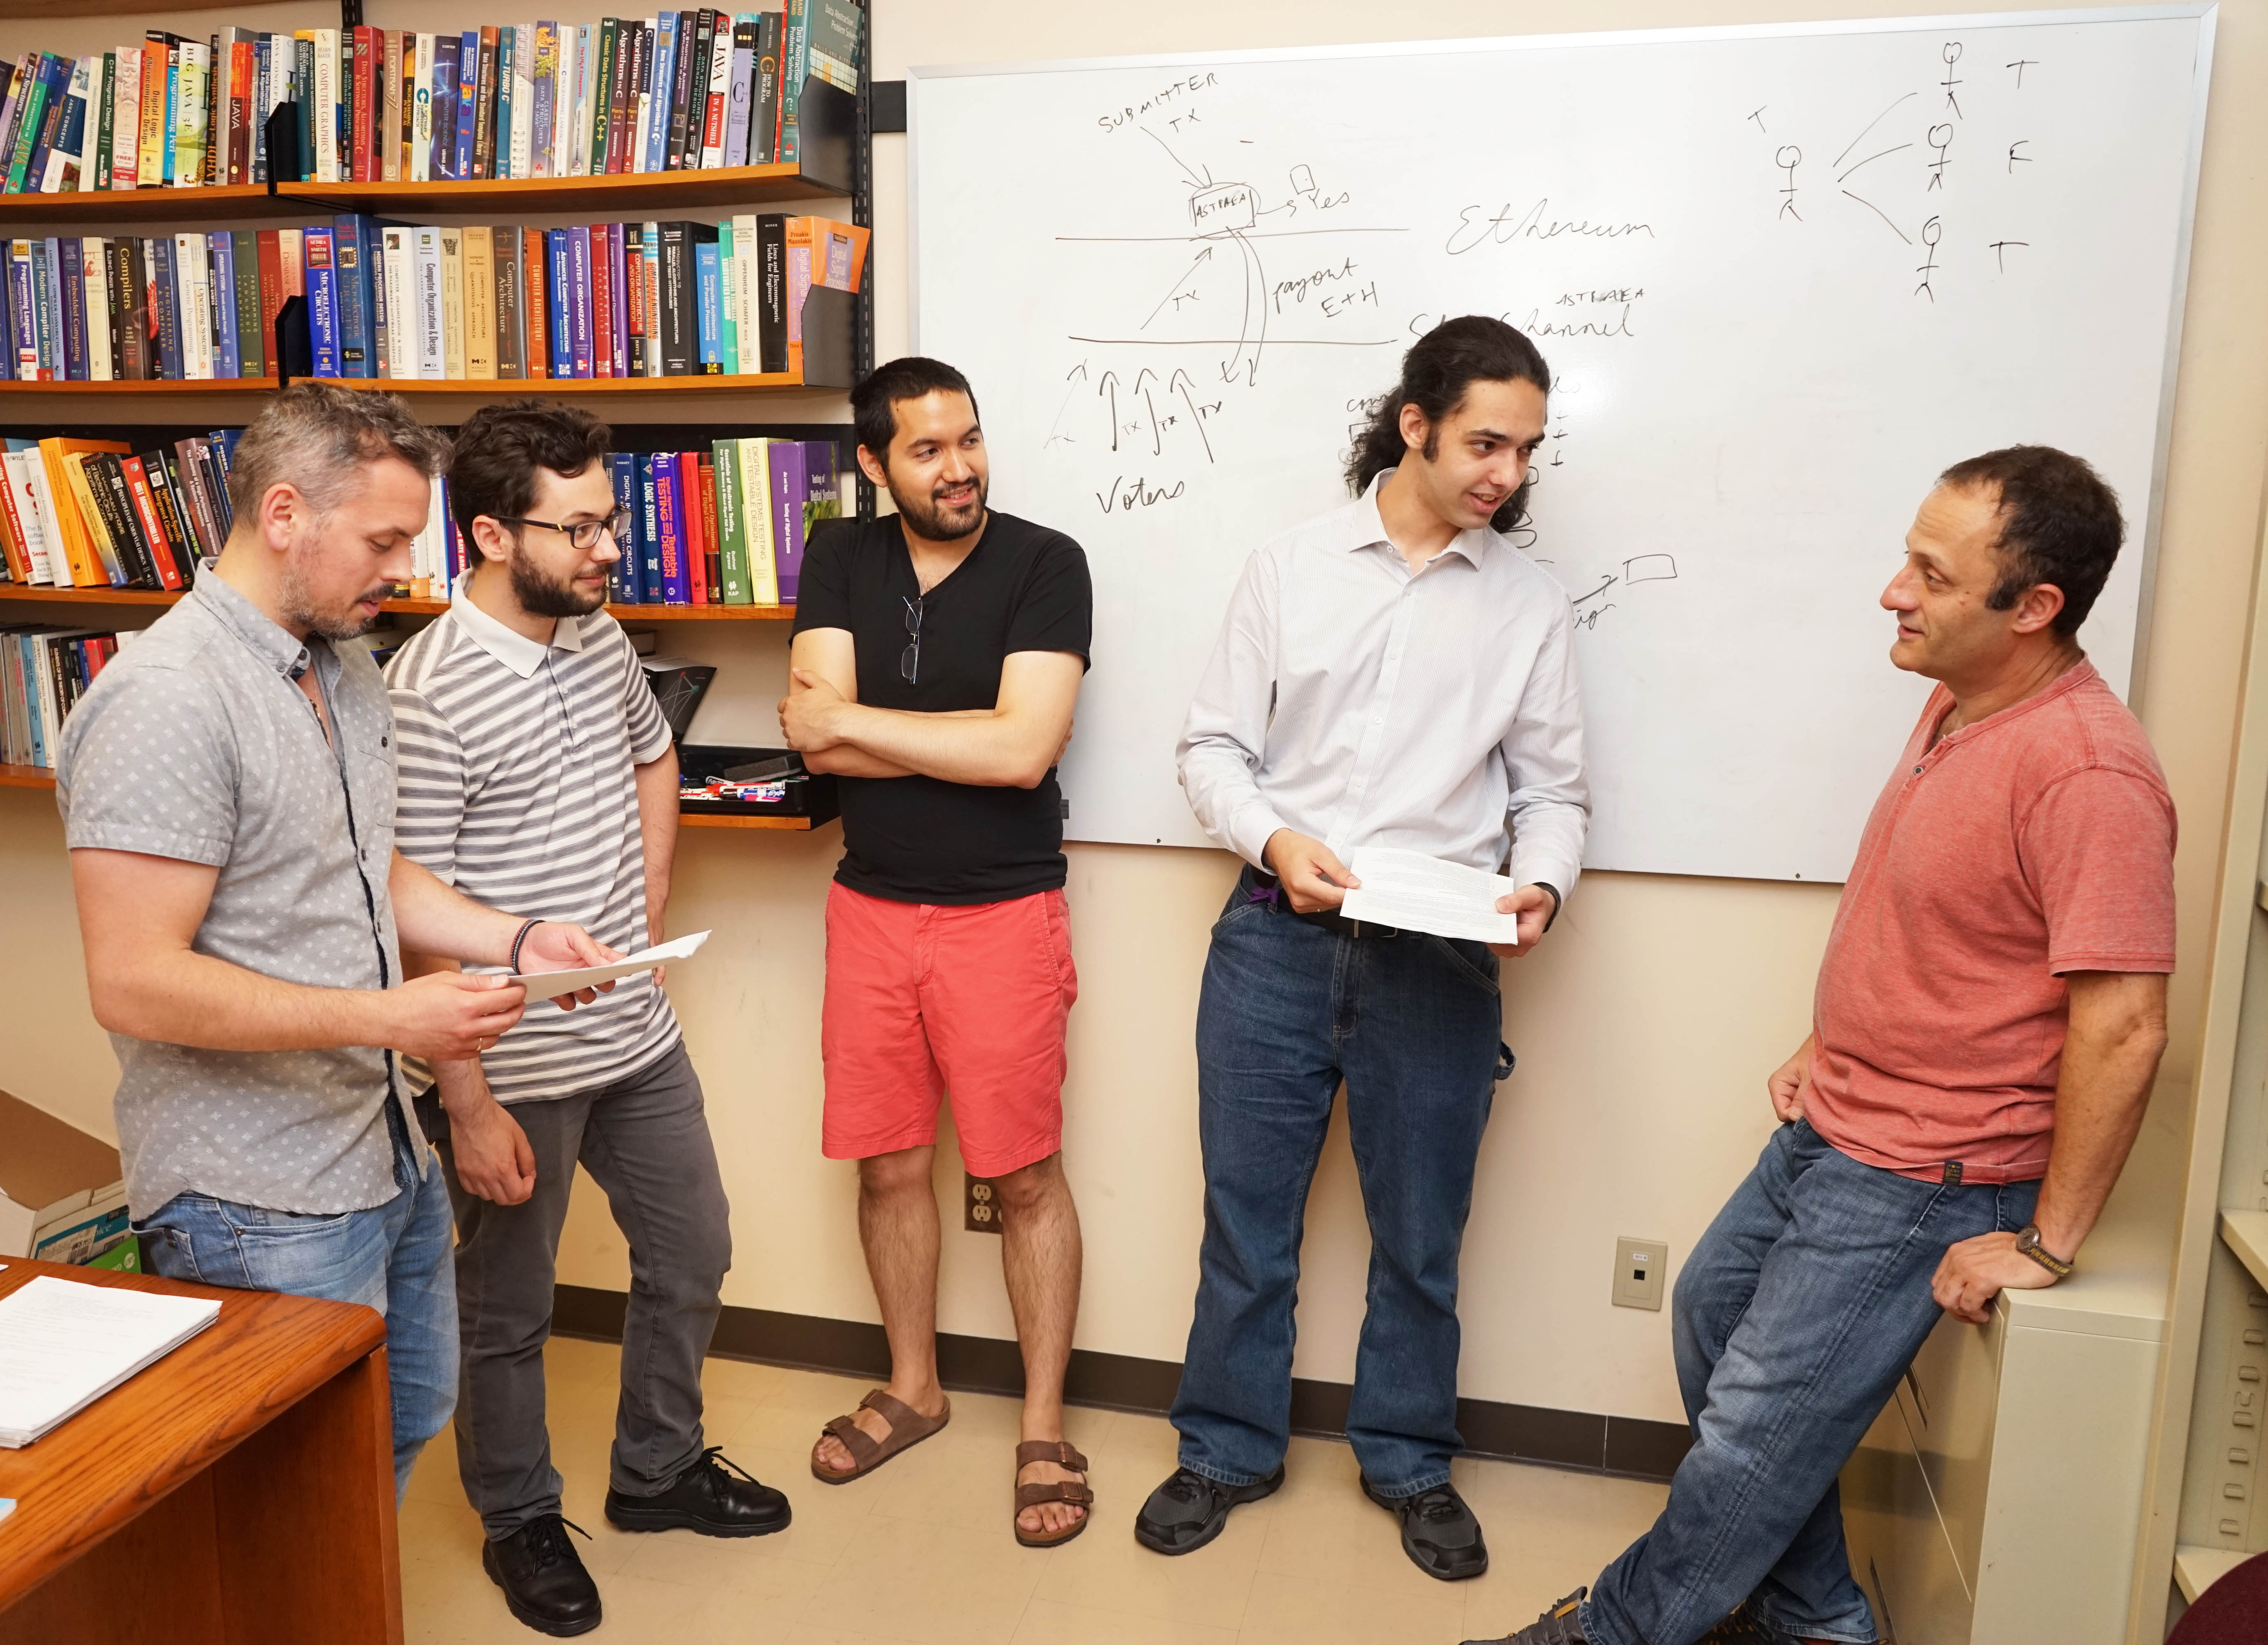 Professor Veneris stands with graduate students at a whiteboard.